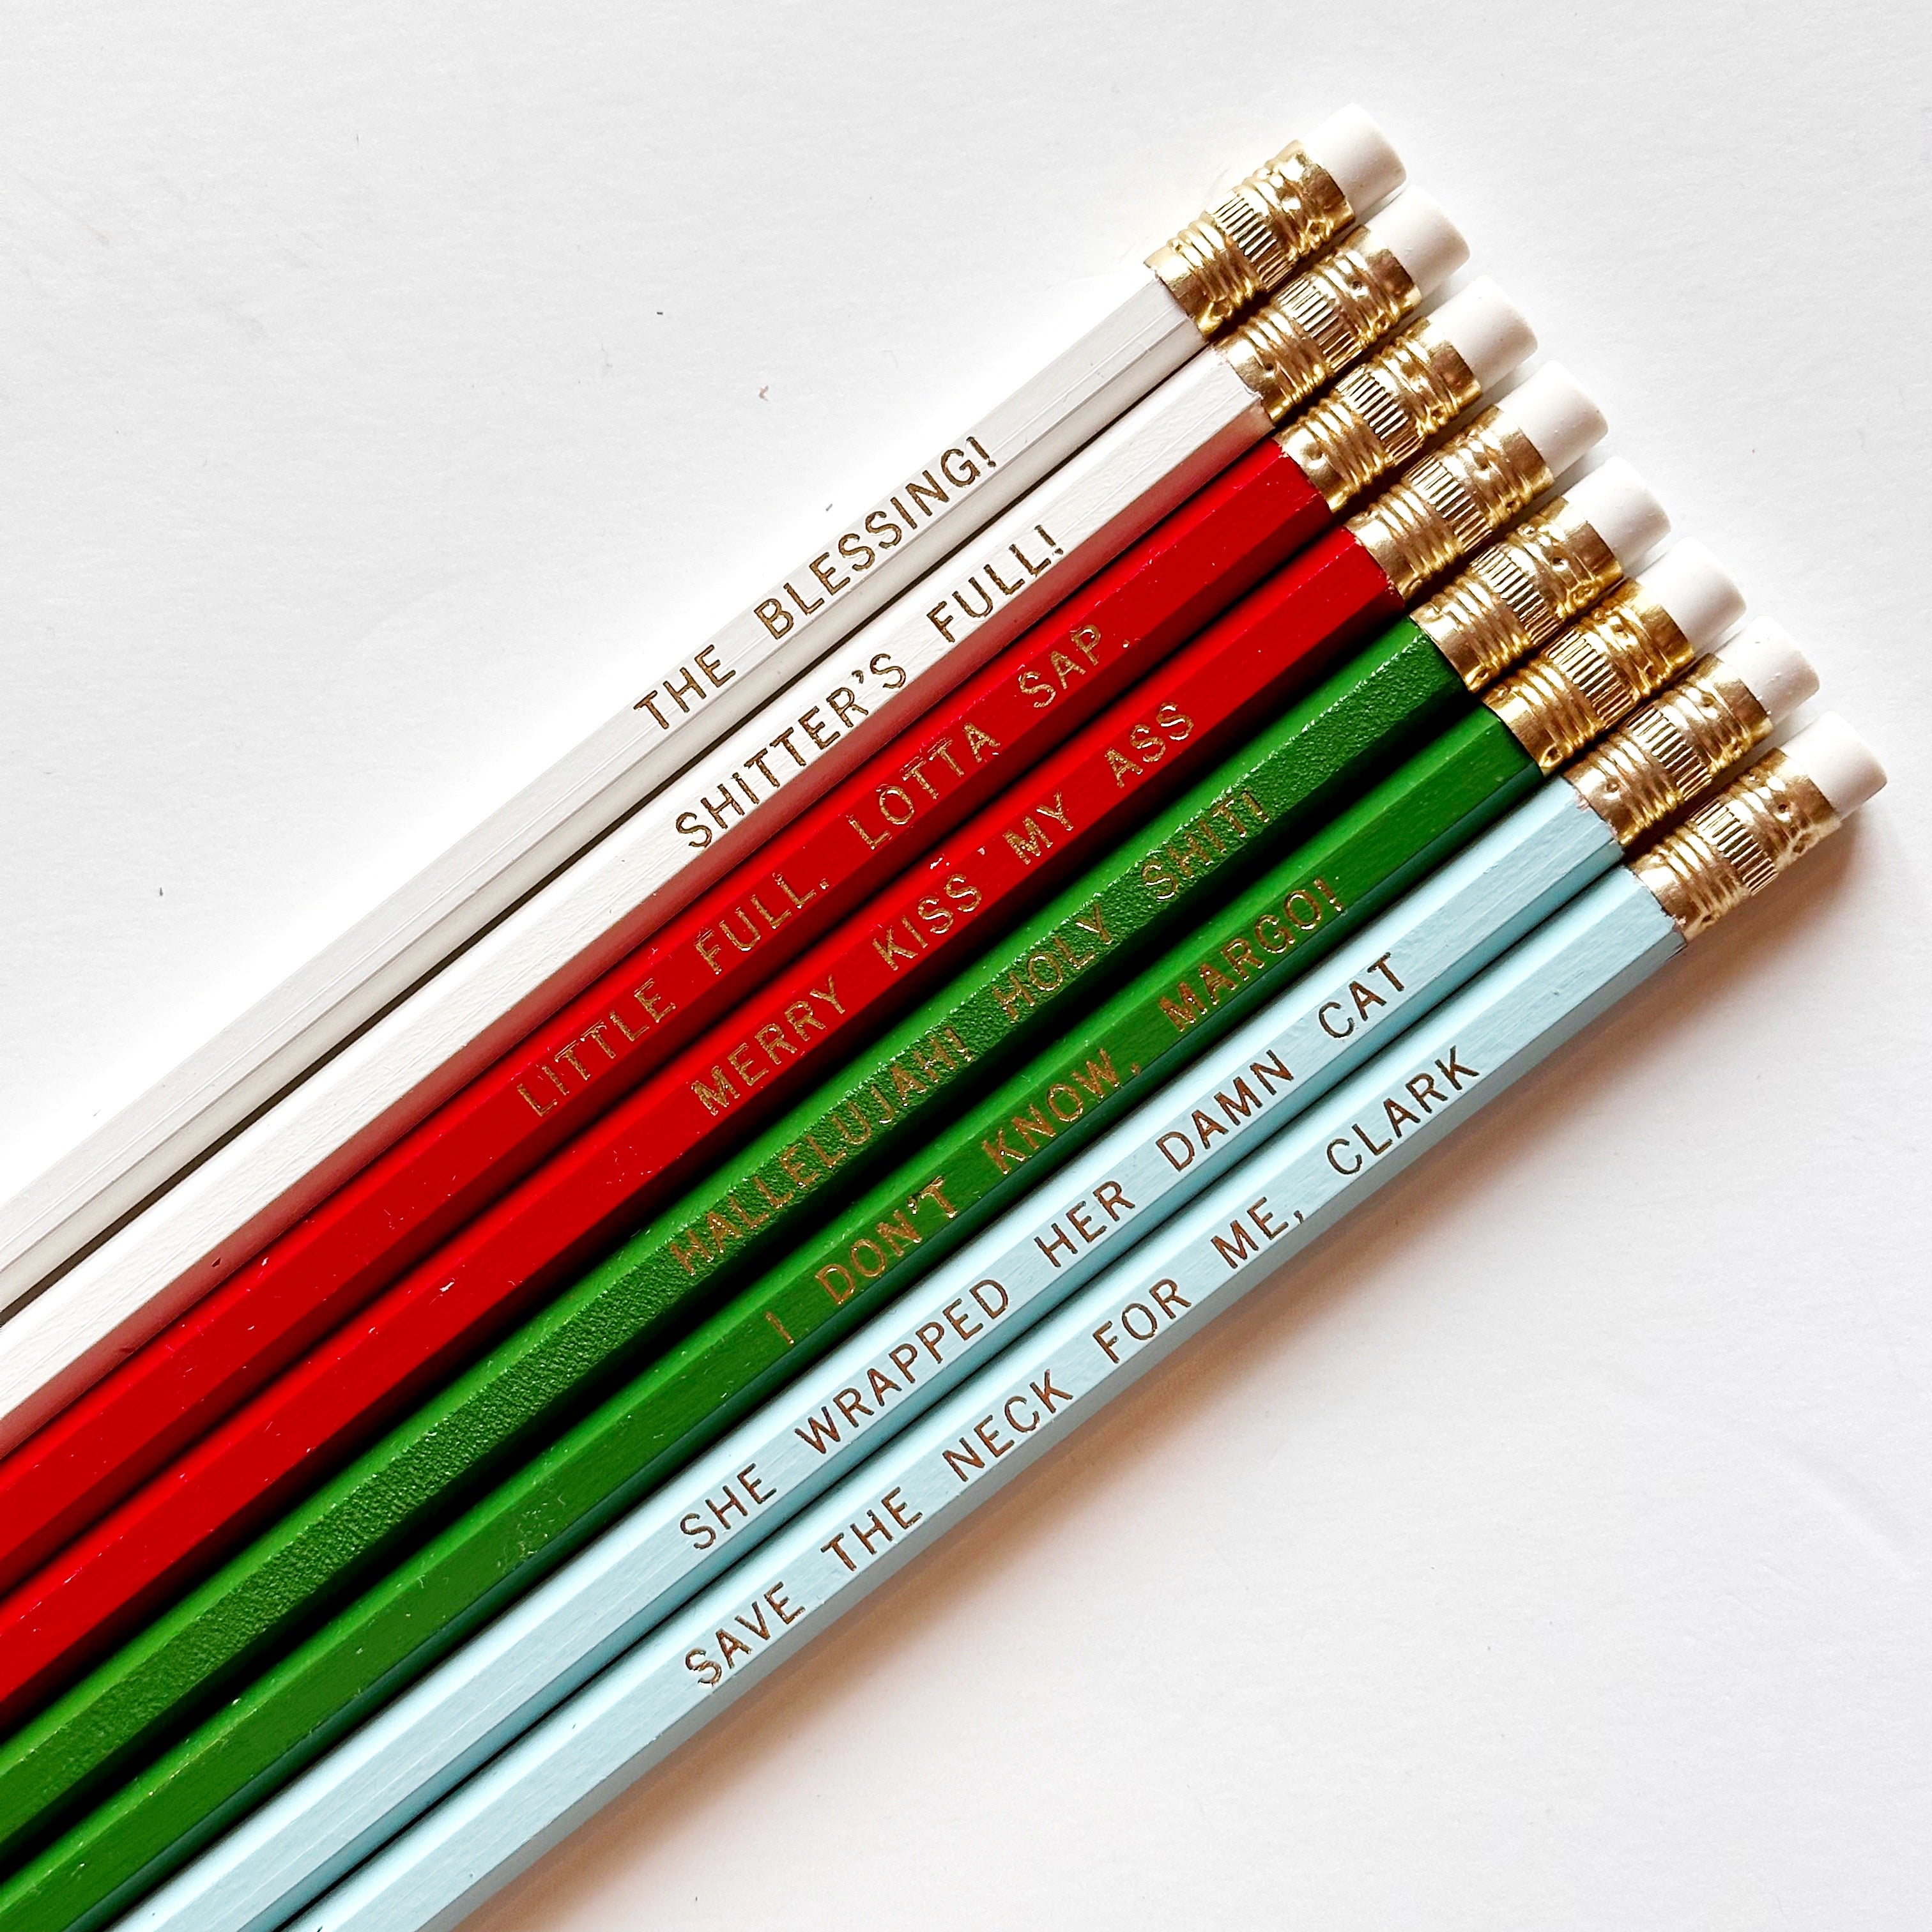 Eight pencils with gold foil text says, "Merry Kiss My Ass Little Full. Lotta Sap. The Blessing! Shitter's Full! Hallelujah! Holy Shit! I Don't Know, Margo! She Wrapped Her Damn Cat Save The Neck For Me, Clark".